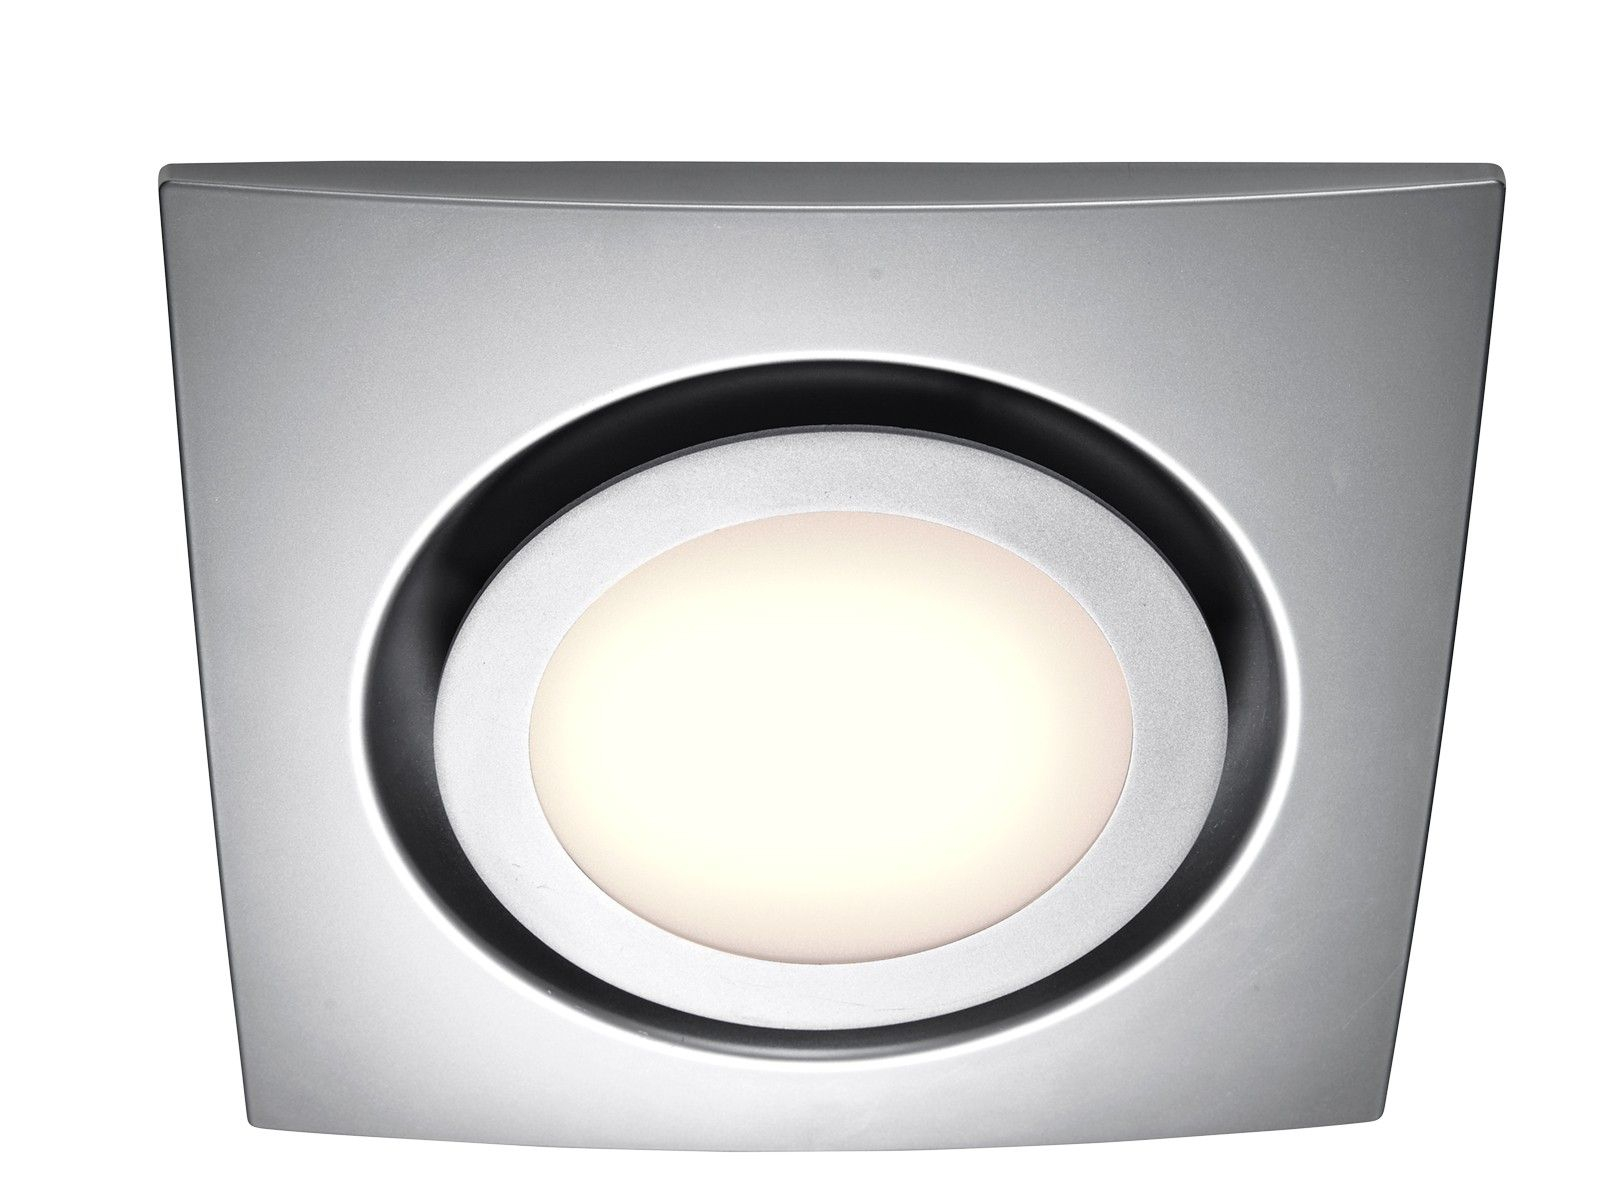 Silver Exhaust Fan With Led Light Bathroom Exhaust Fan within dimensions 1600 X 1200